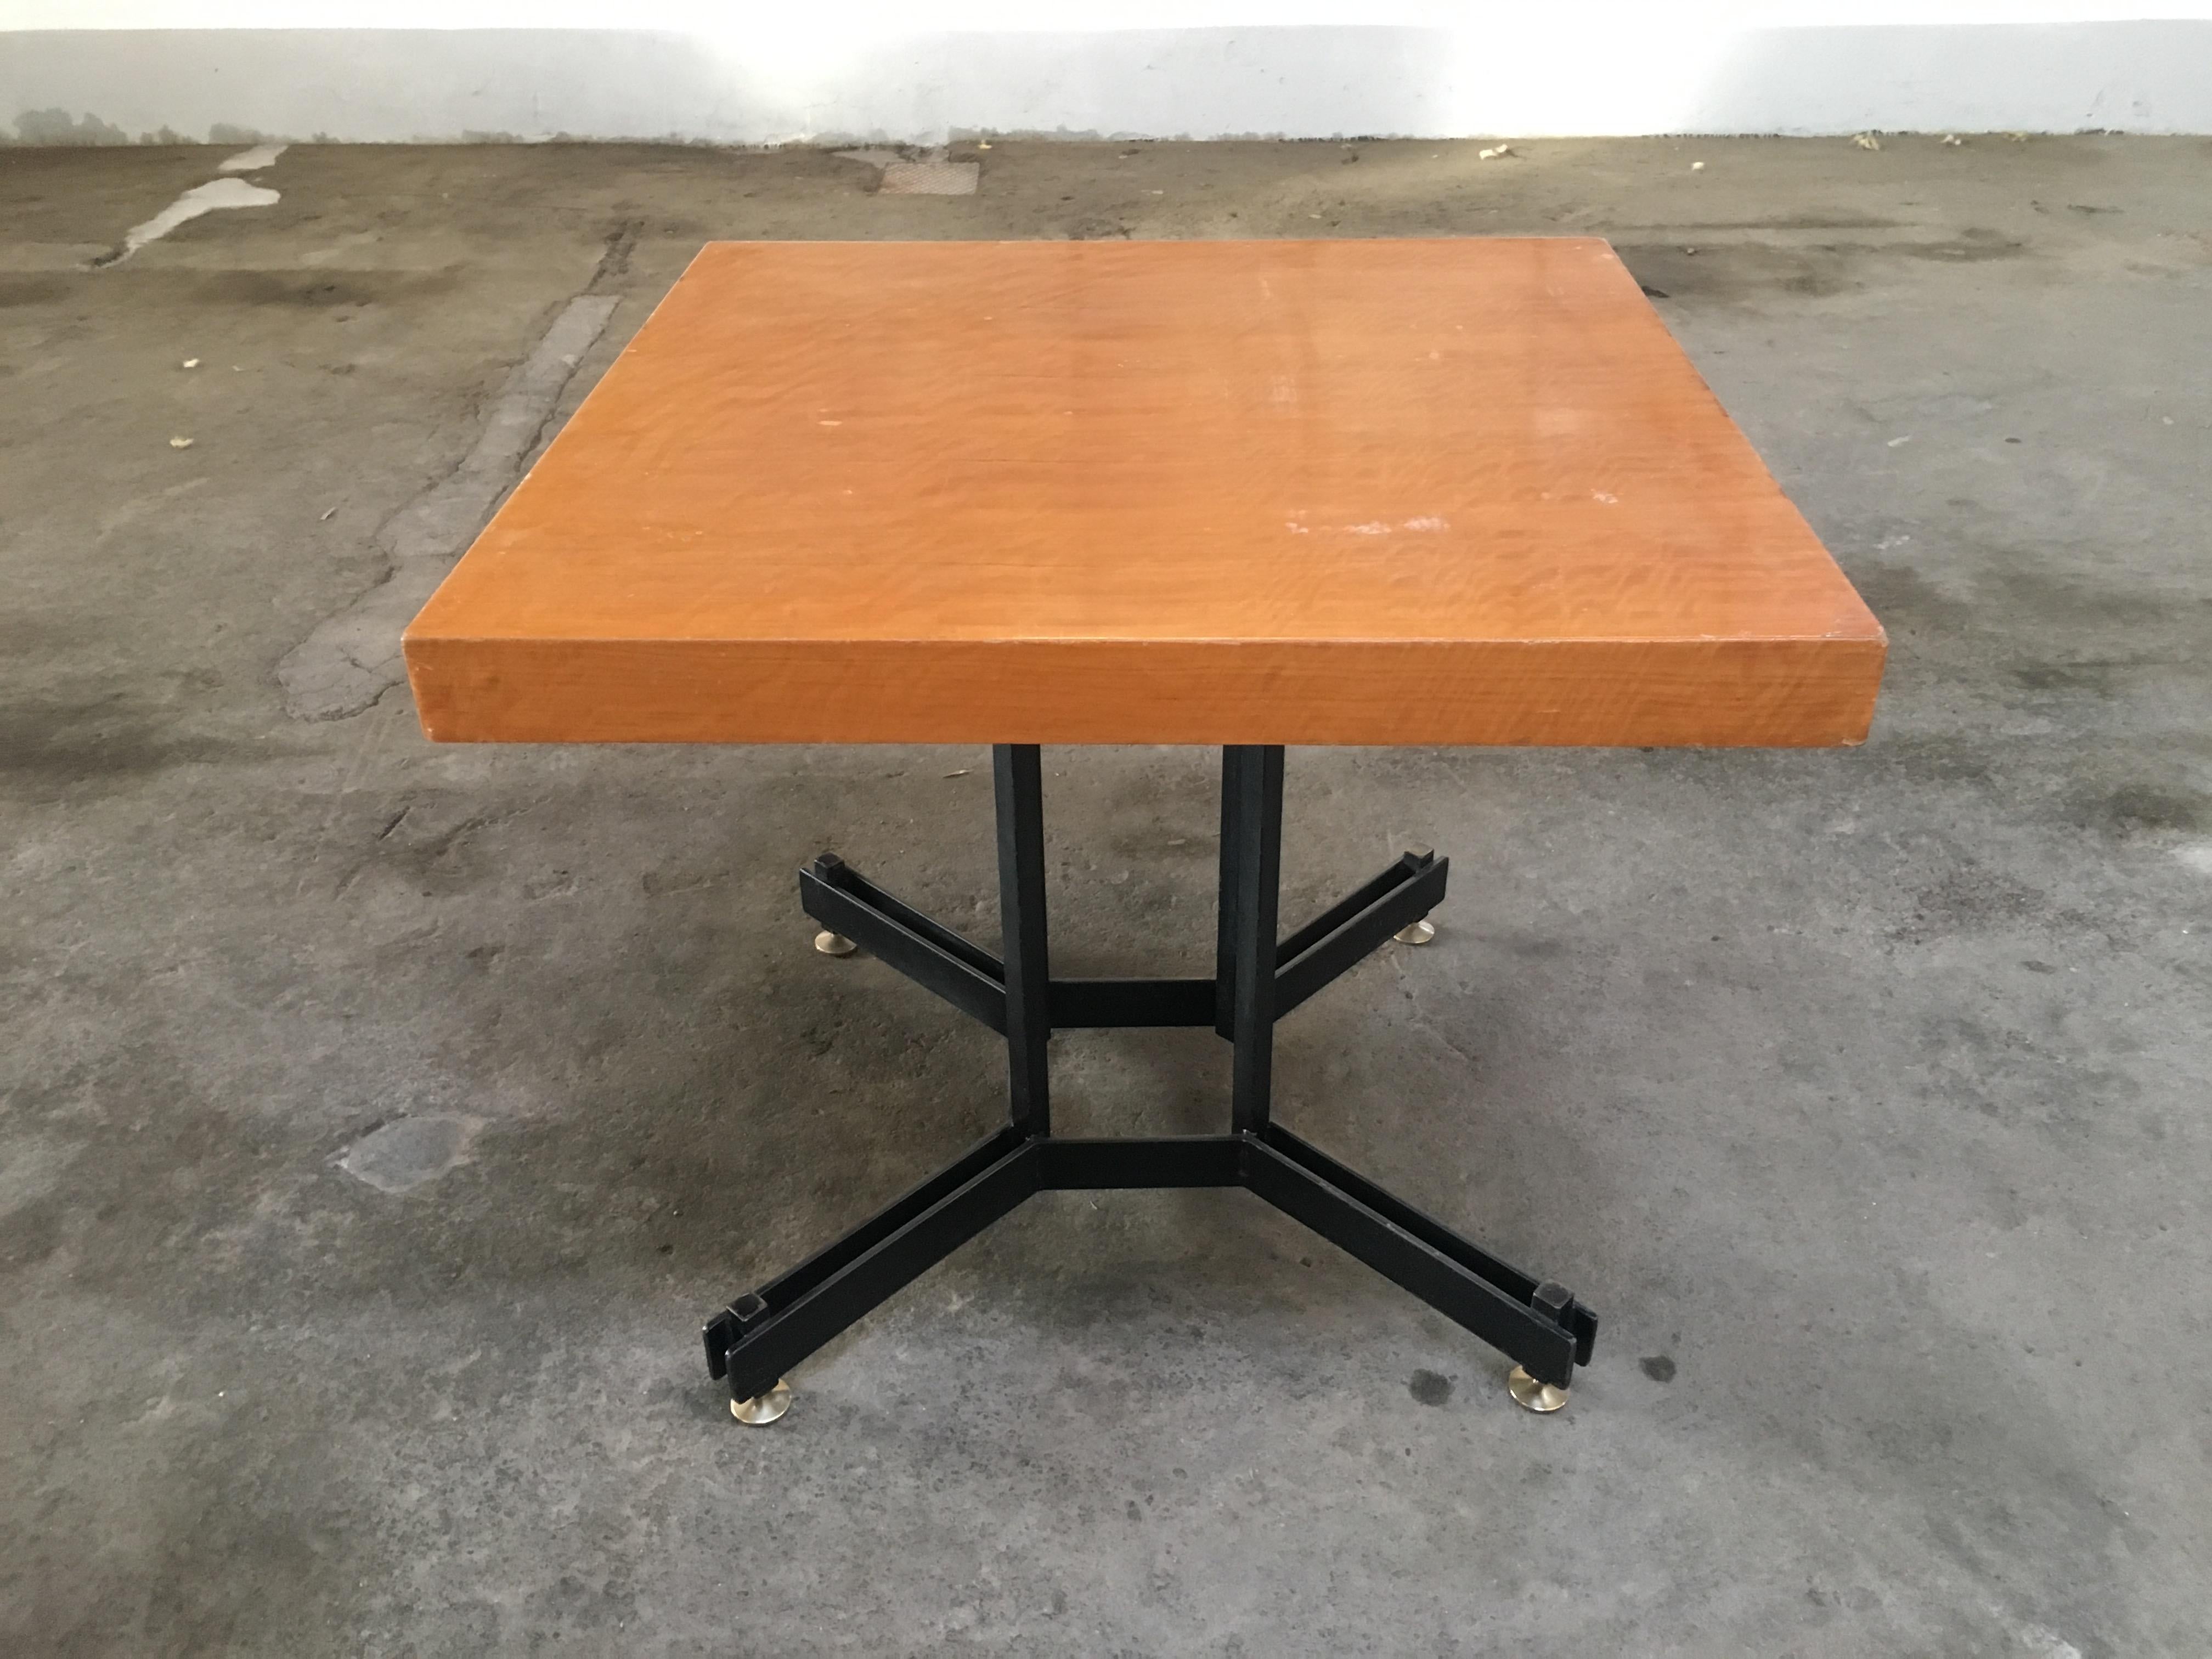 Mid-Century Modern Italian black iron base table with wood veneered top and brass feet, 1970s
The wooden top of the table shows some wear due to age and use but the table is in very good vintage condition.

 